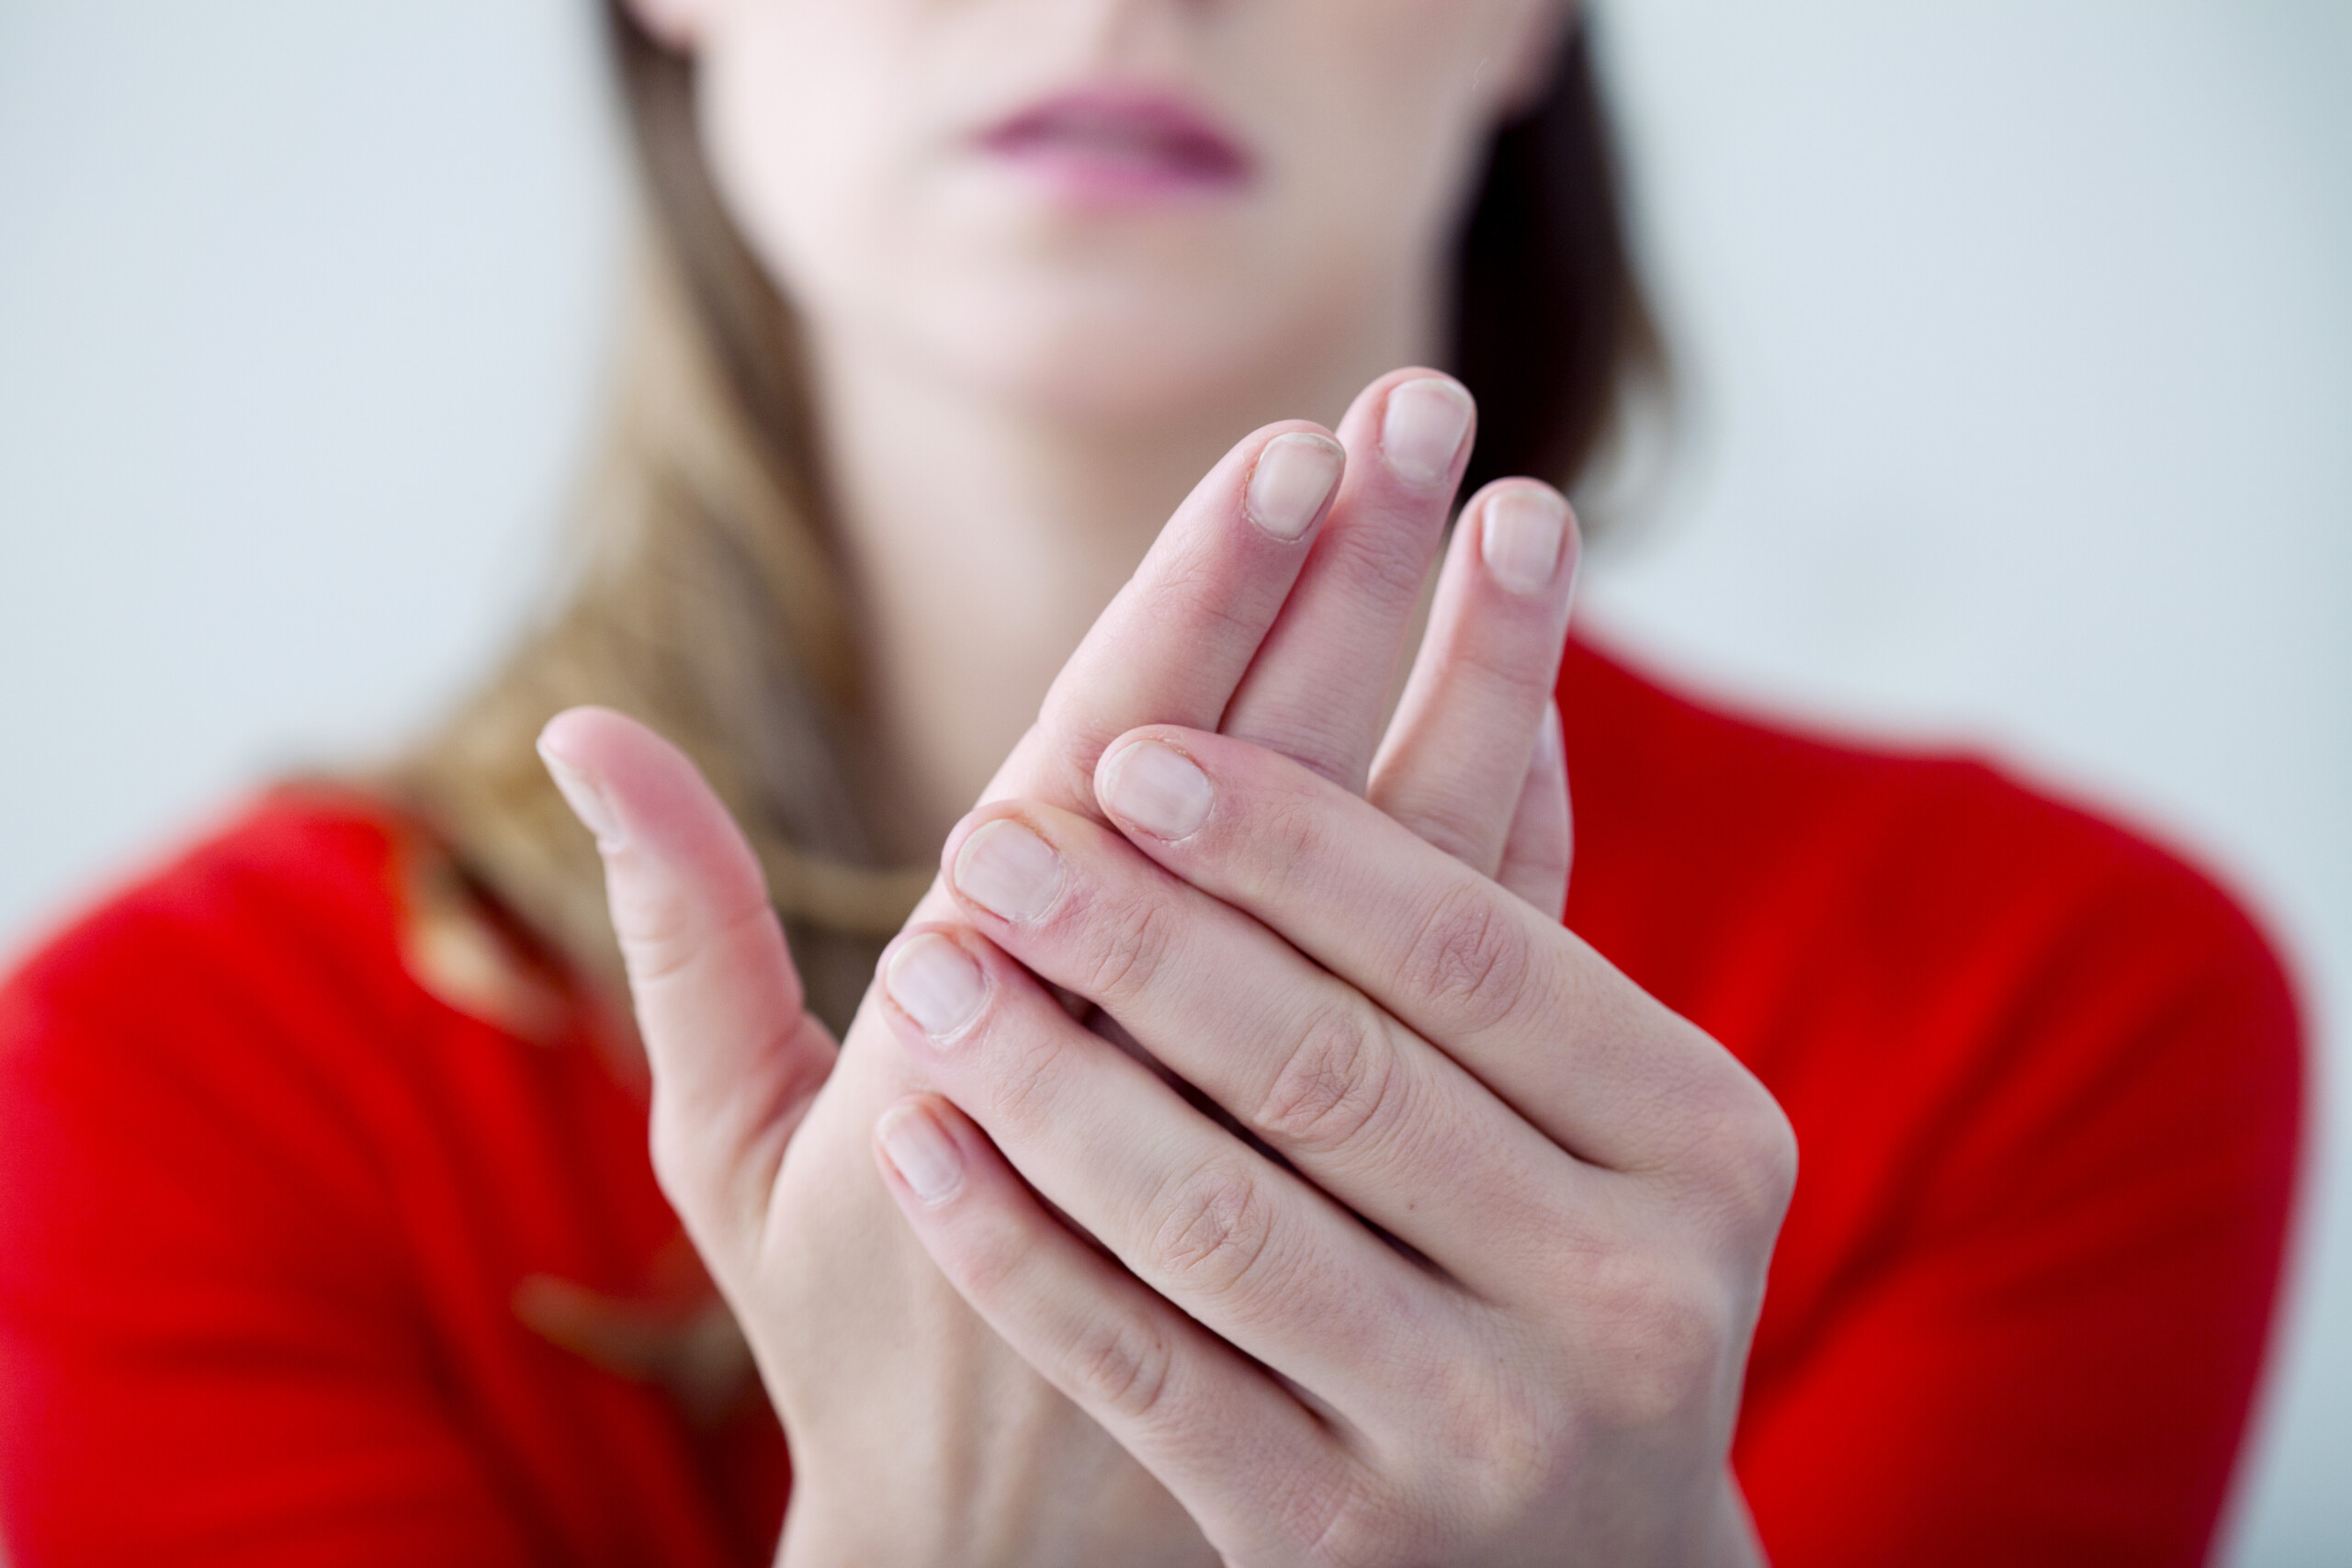 Why Can’t Carpal Tunnel Syndrome Go Away on Its Own?